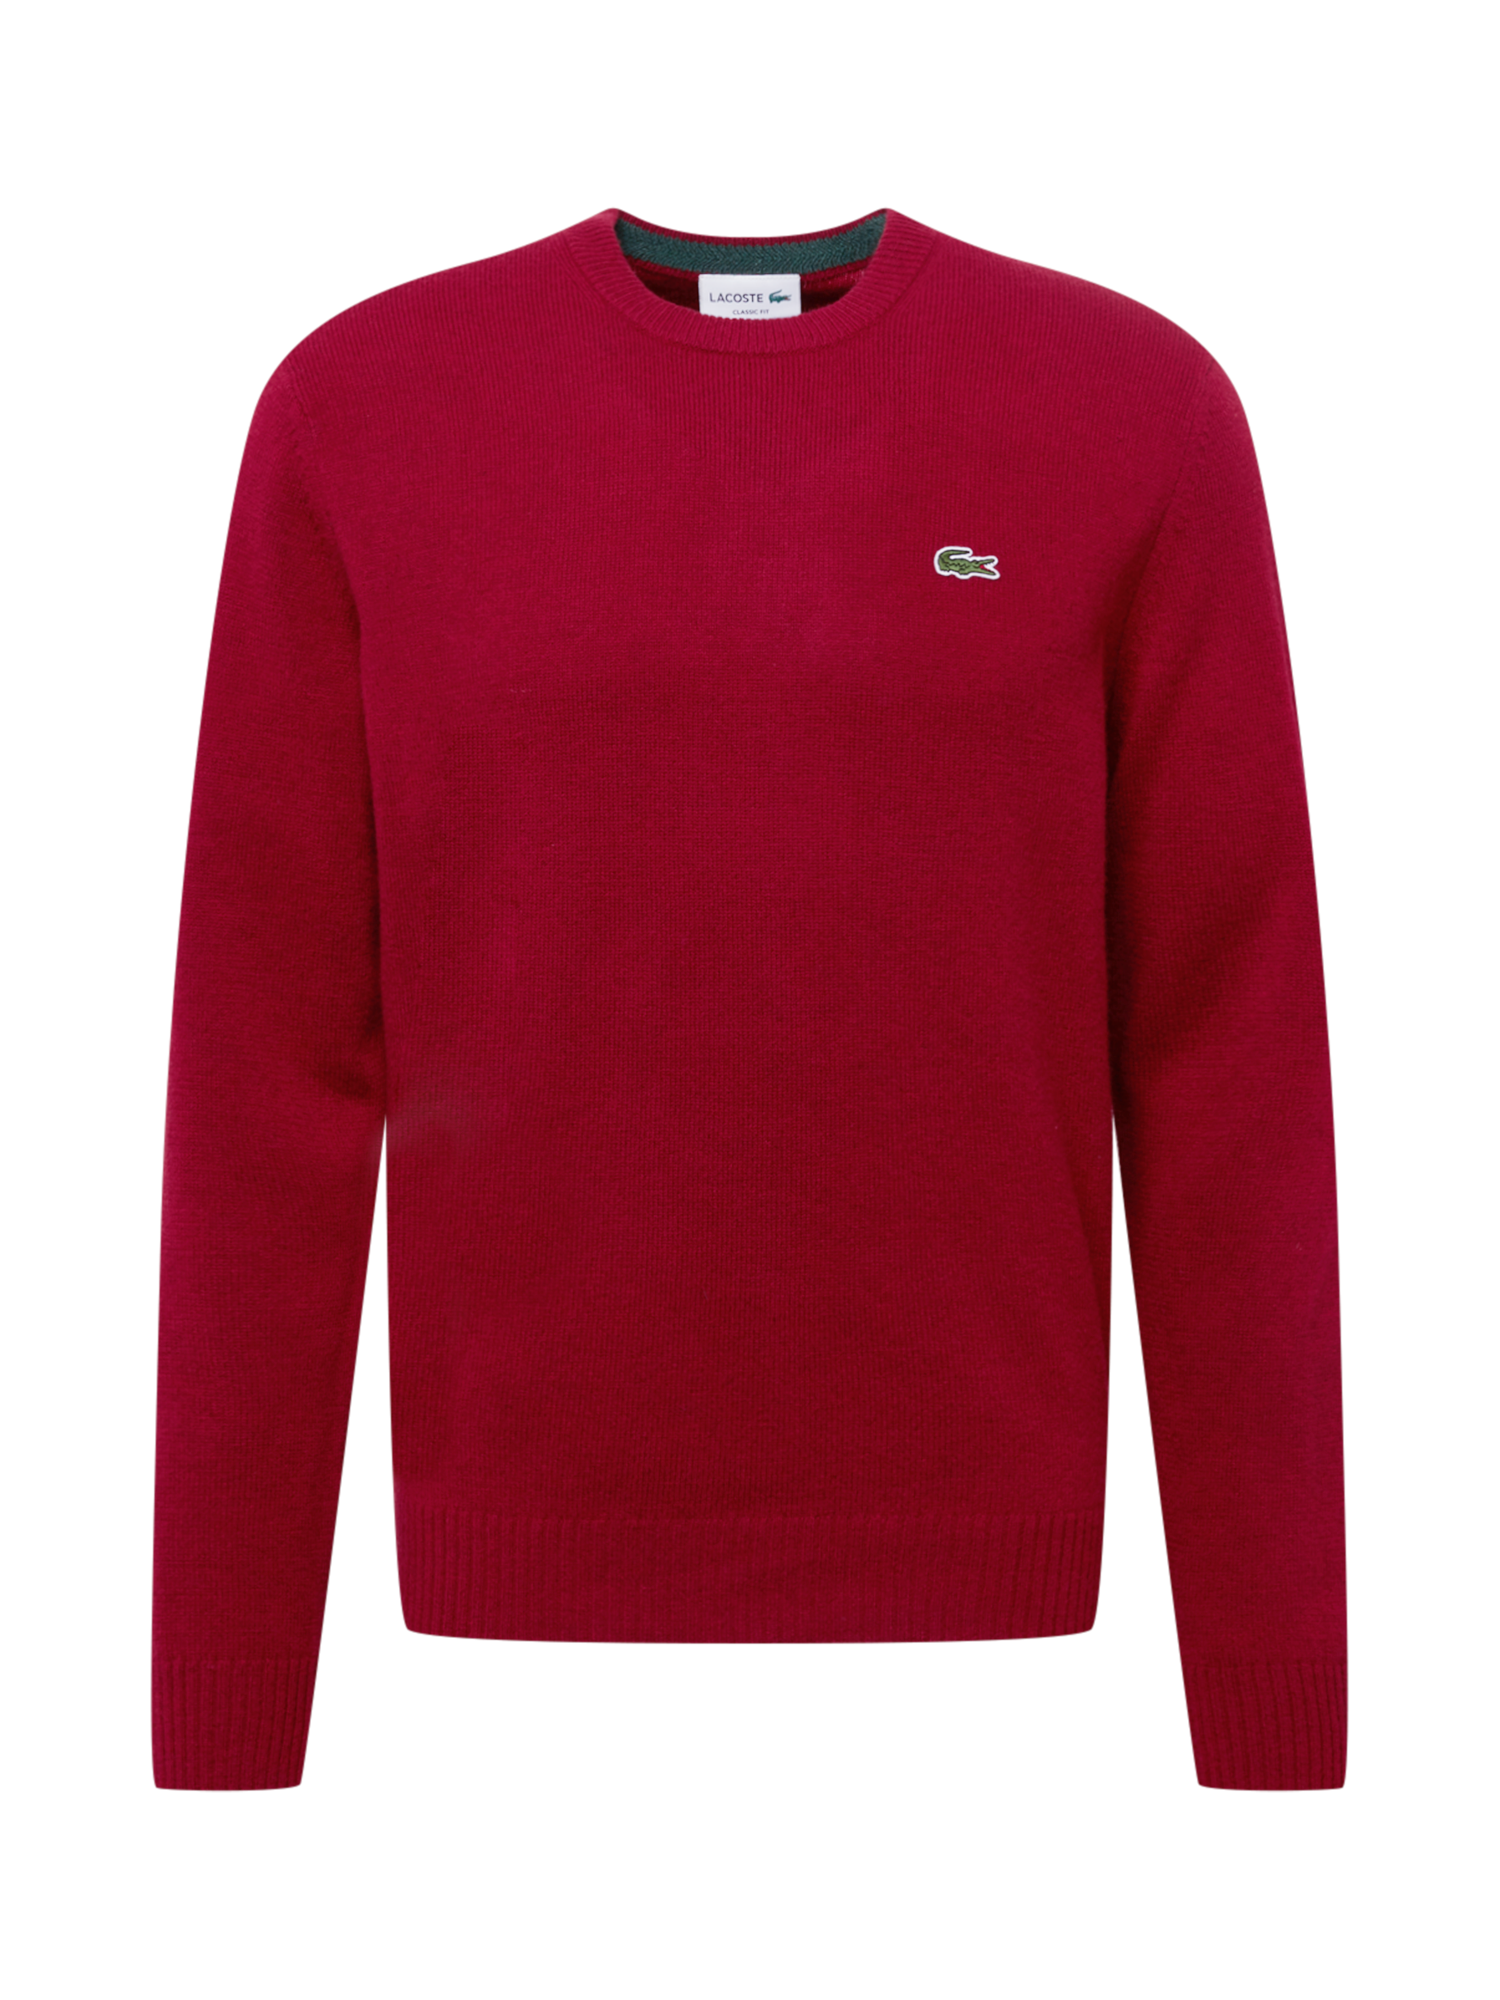 Pull-over LACOSTE en Rouge Rubis 